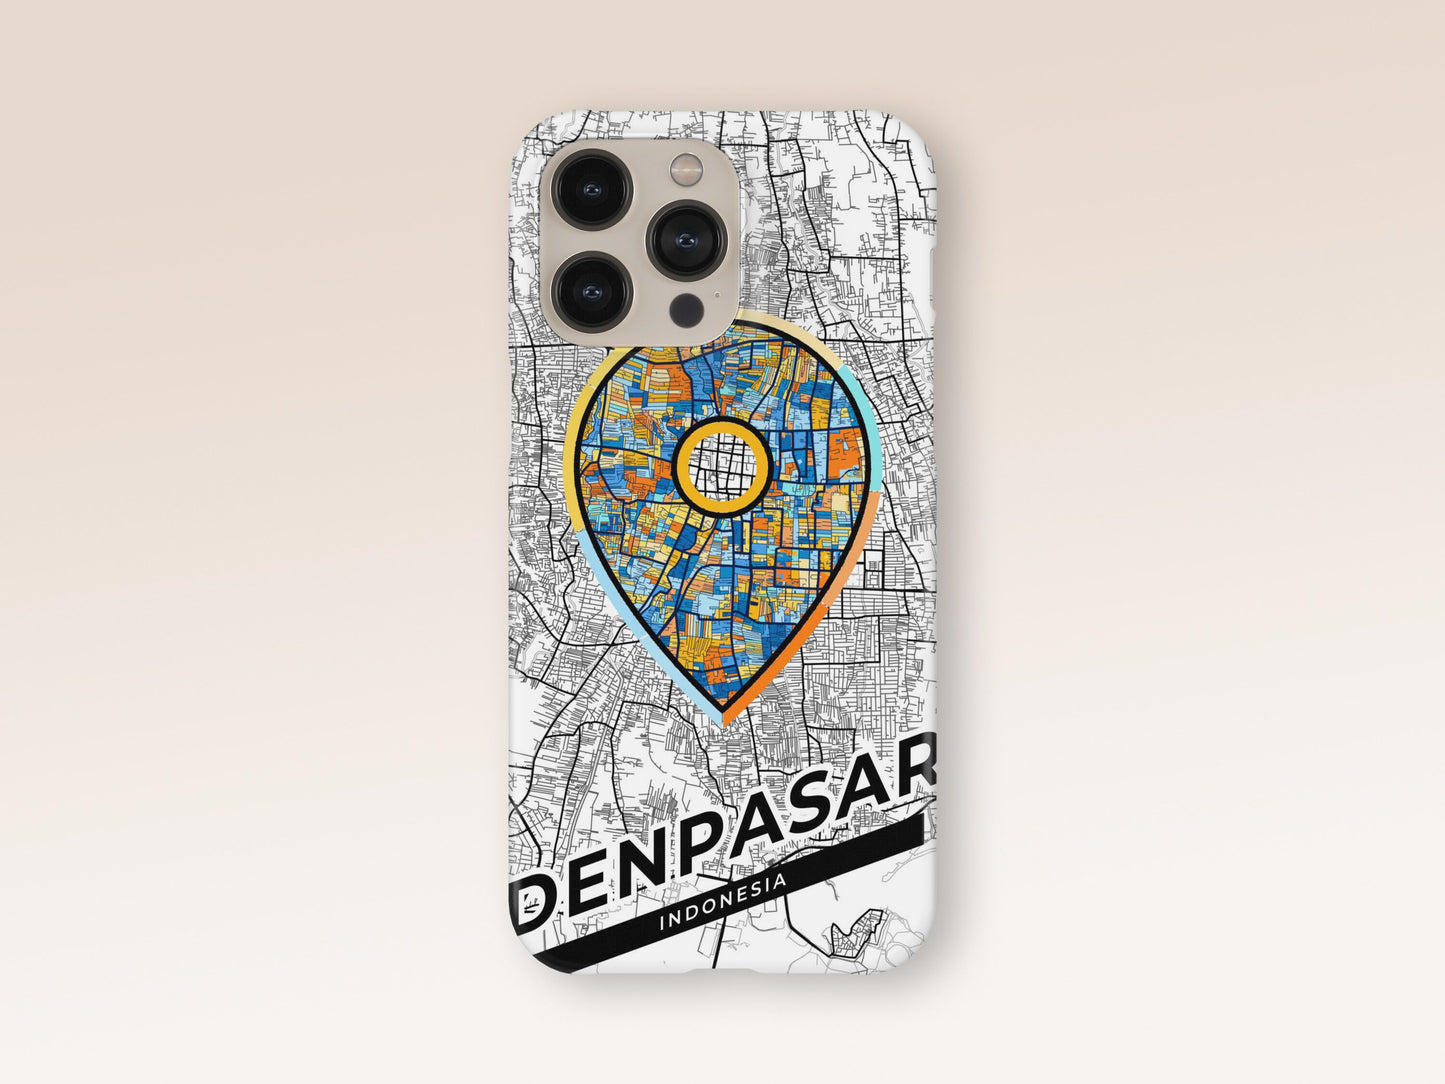 Denpasar Indonesia slim phone case with colorful icon. Birthday, wedding or housewarming gift. Couple match cases. 1